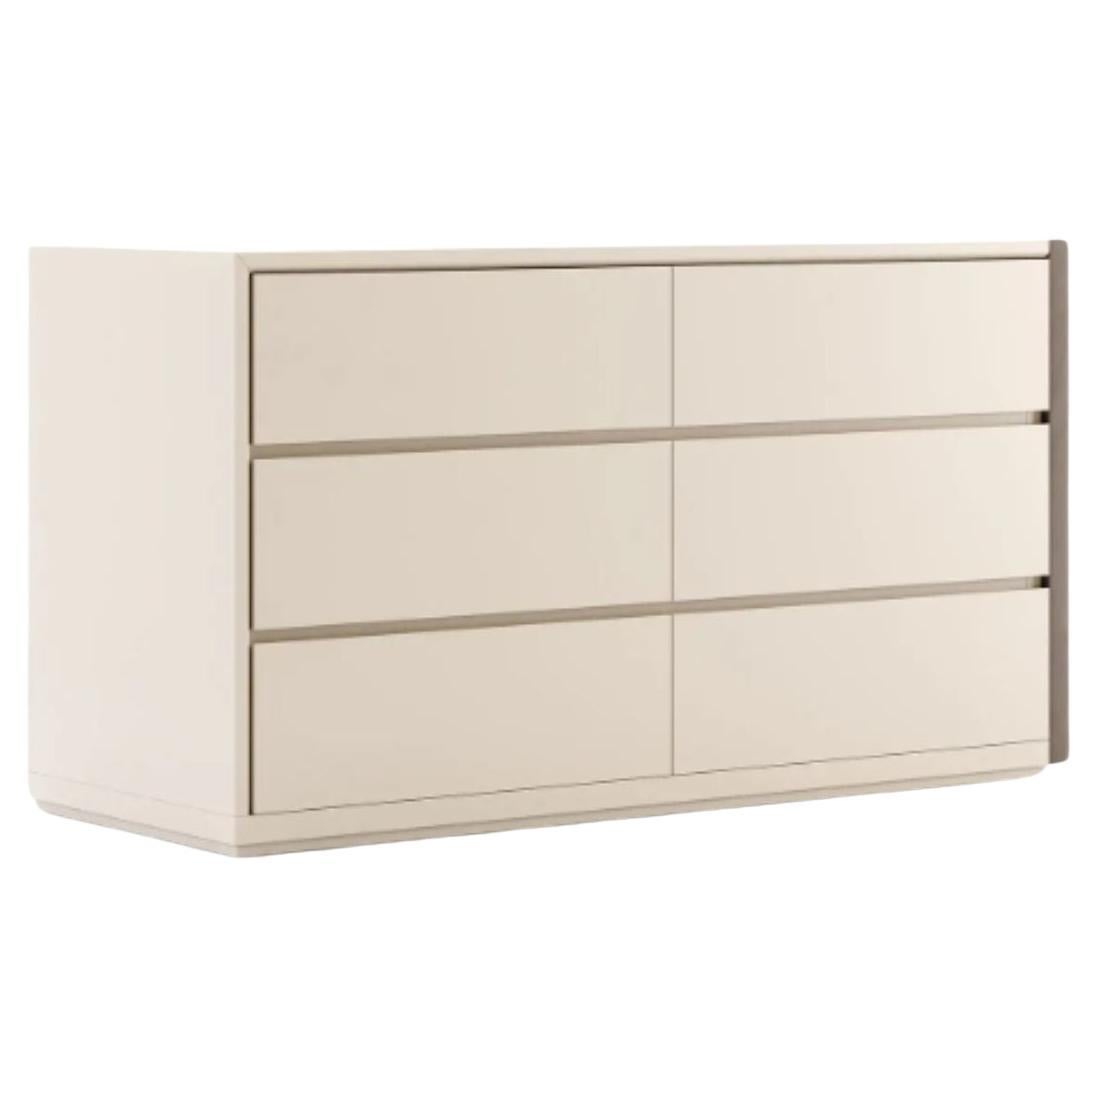 Taylor Console Table with 6 Drawers Left / Right by Domkapa